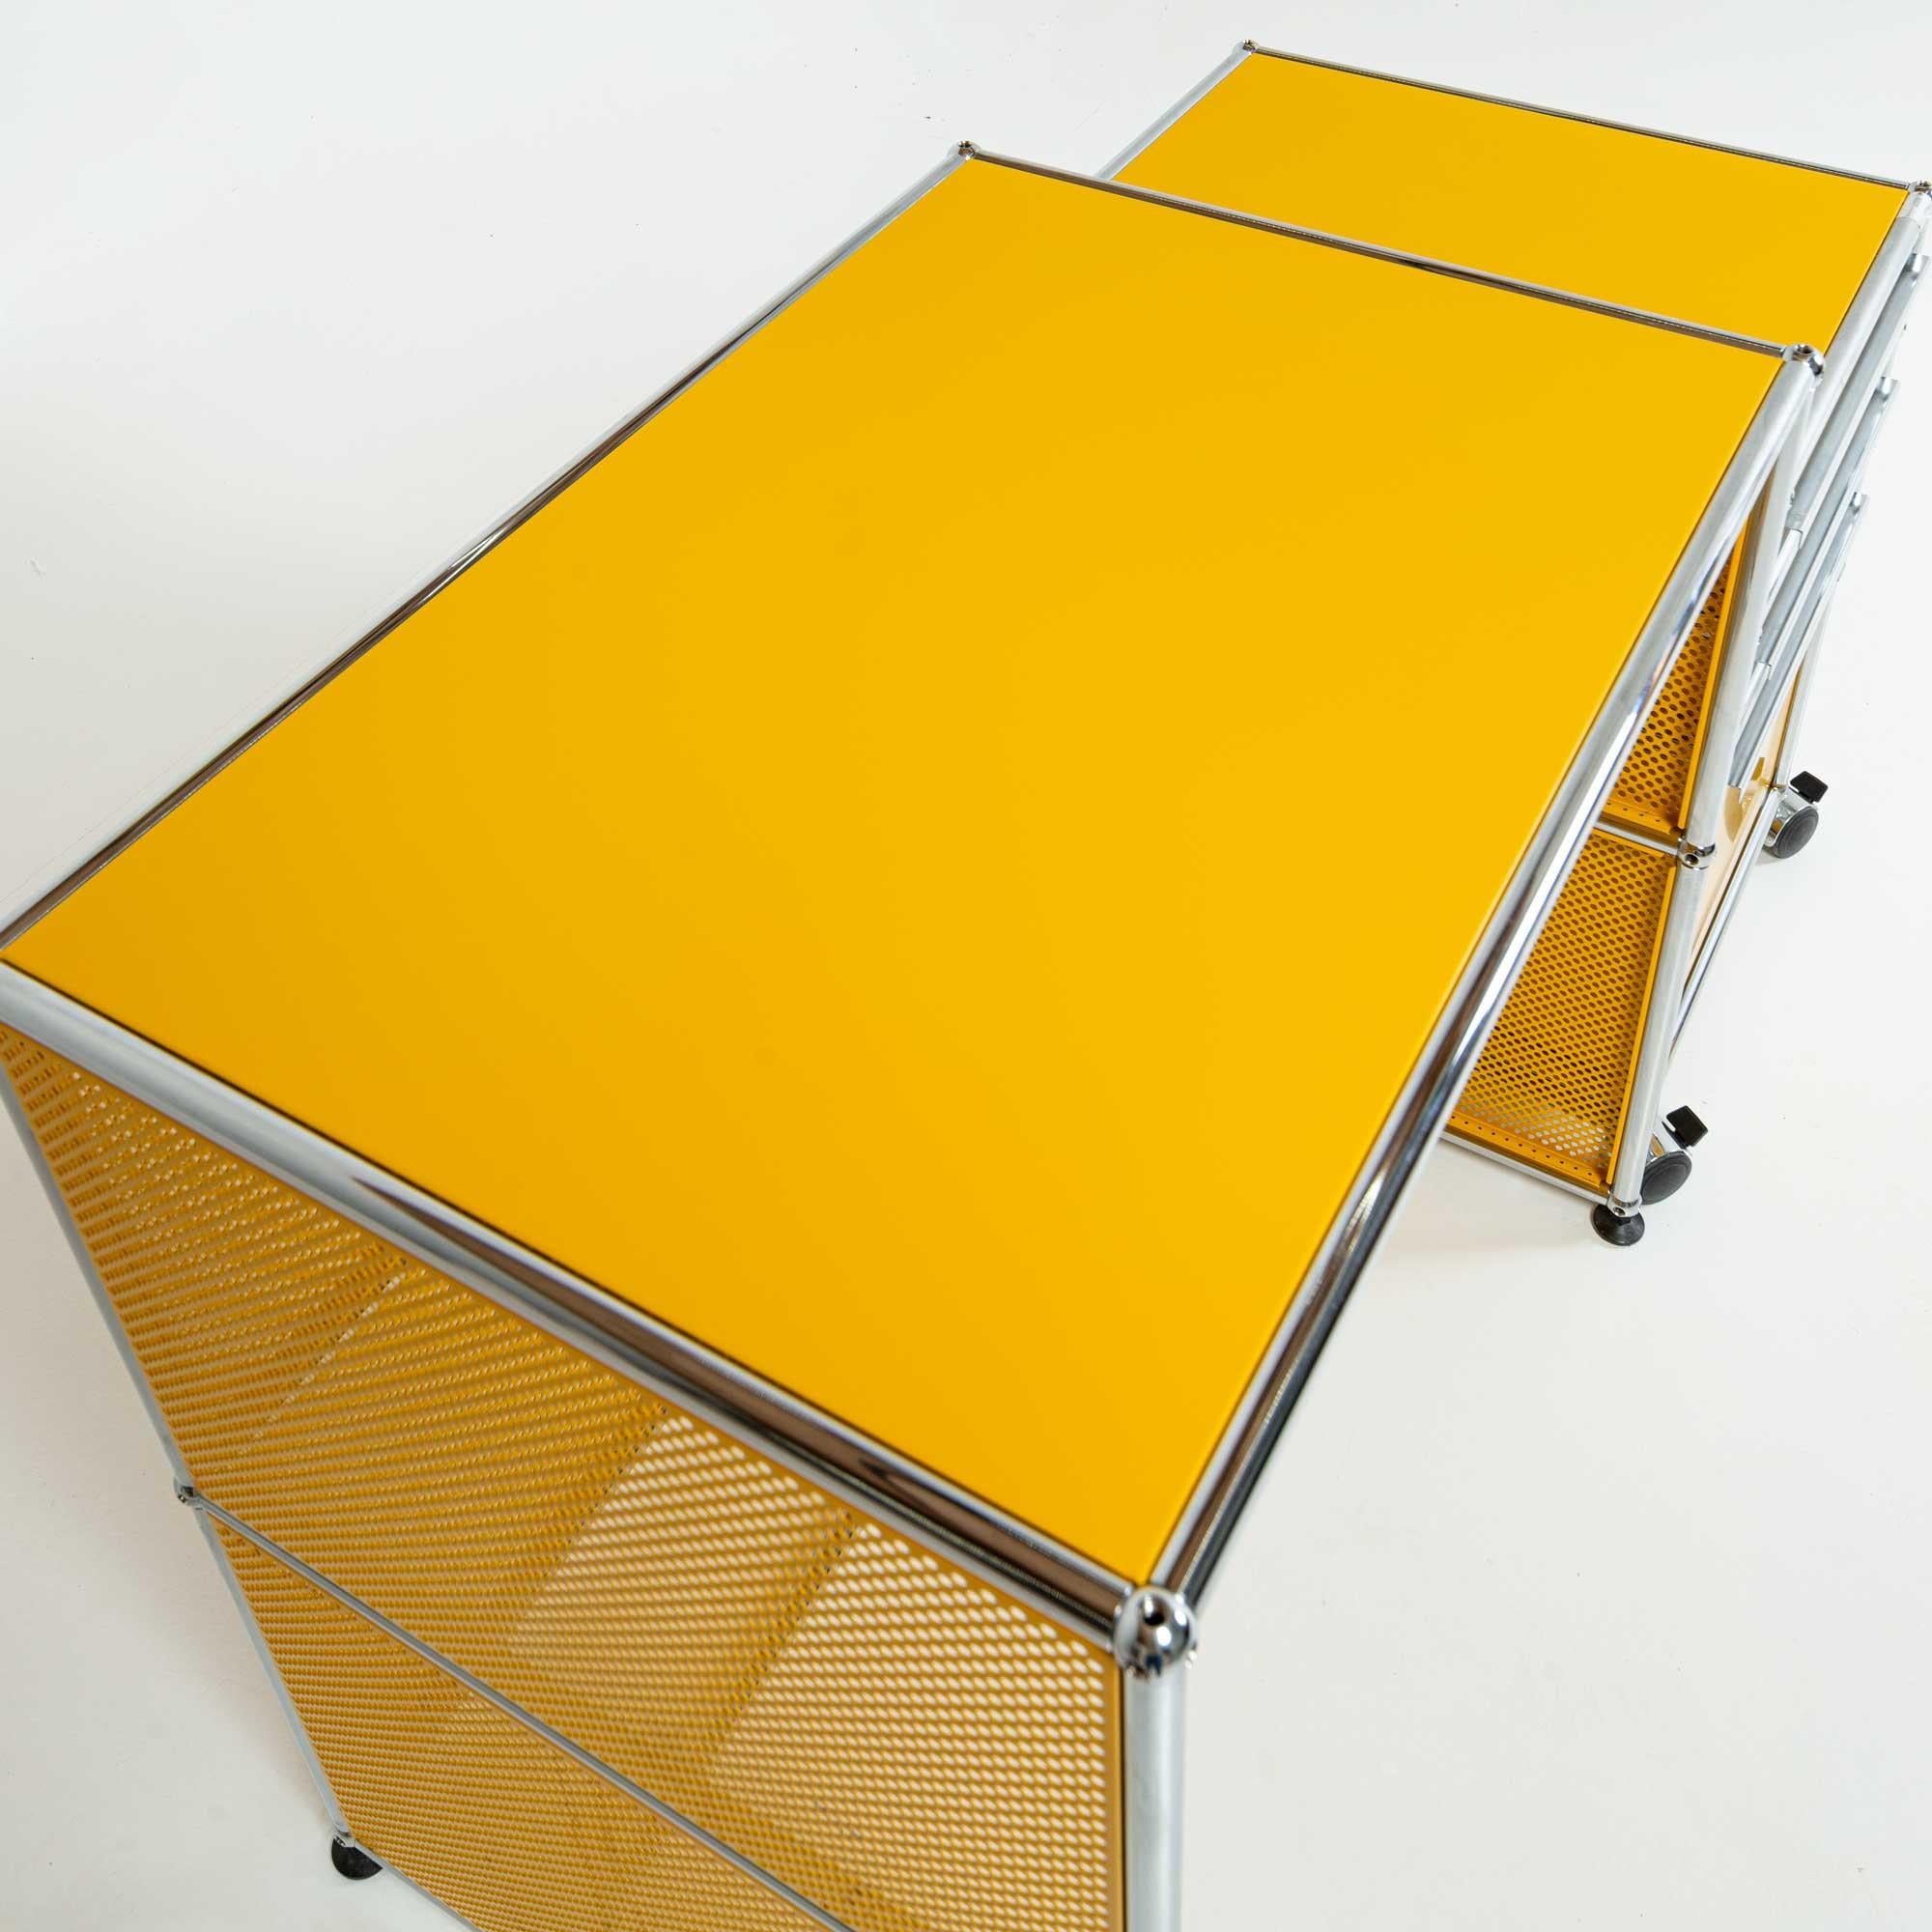 USM Modular System Desk and Rolling Cabinet in Golden Yellow 2